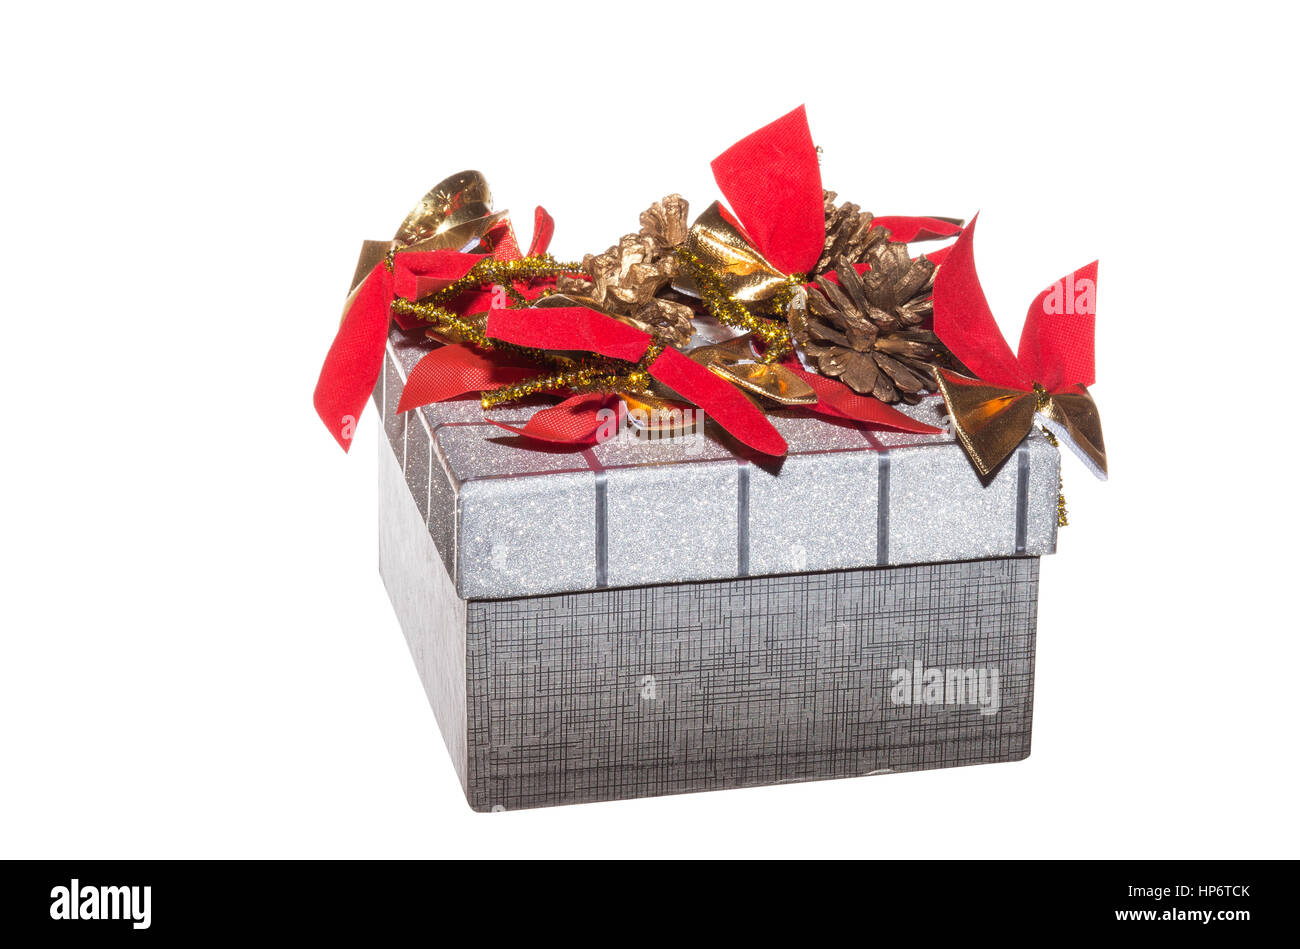 Decorated gift box isolated on white background. Gift box decorated with red bows and pine cones. Stock Photo